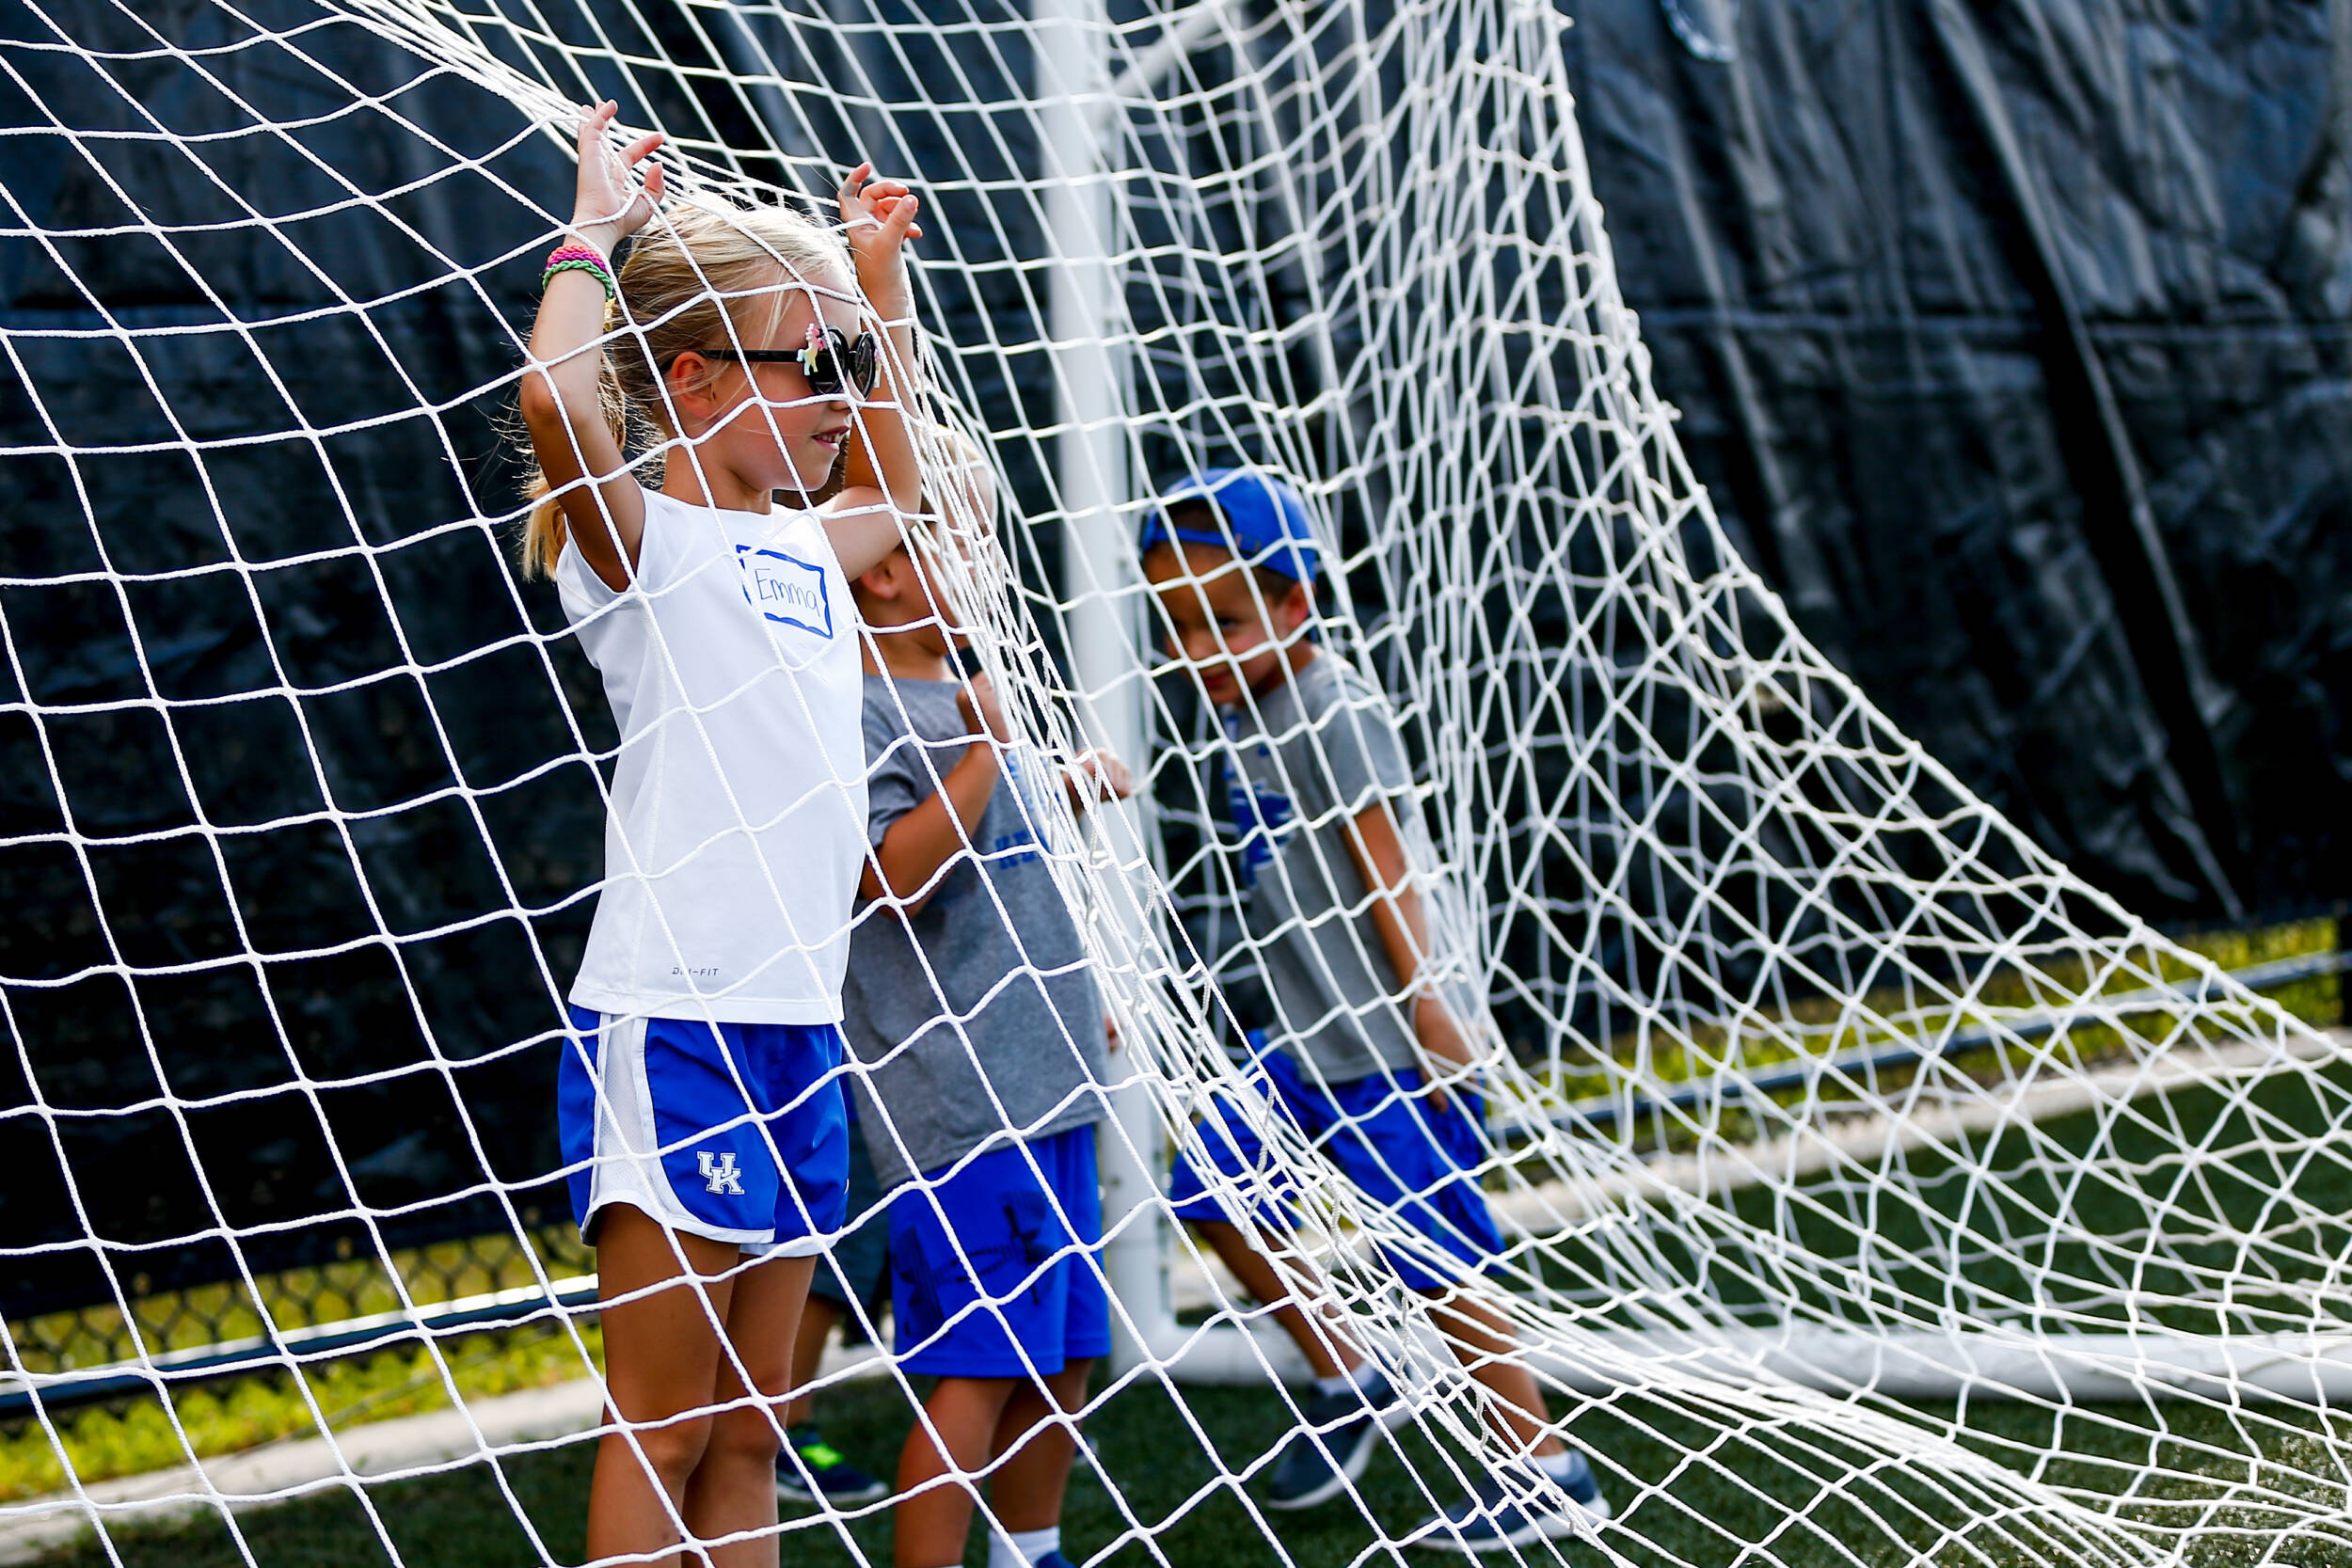 Kentucky Soccer Announces Fan Day For 2022 to be held Aug. 13